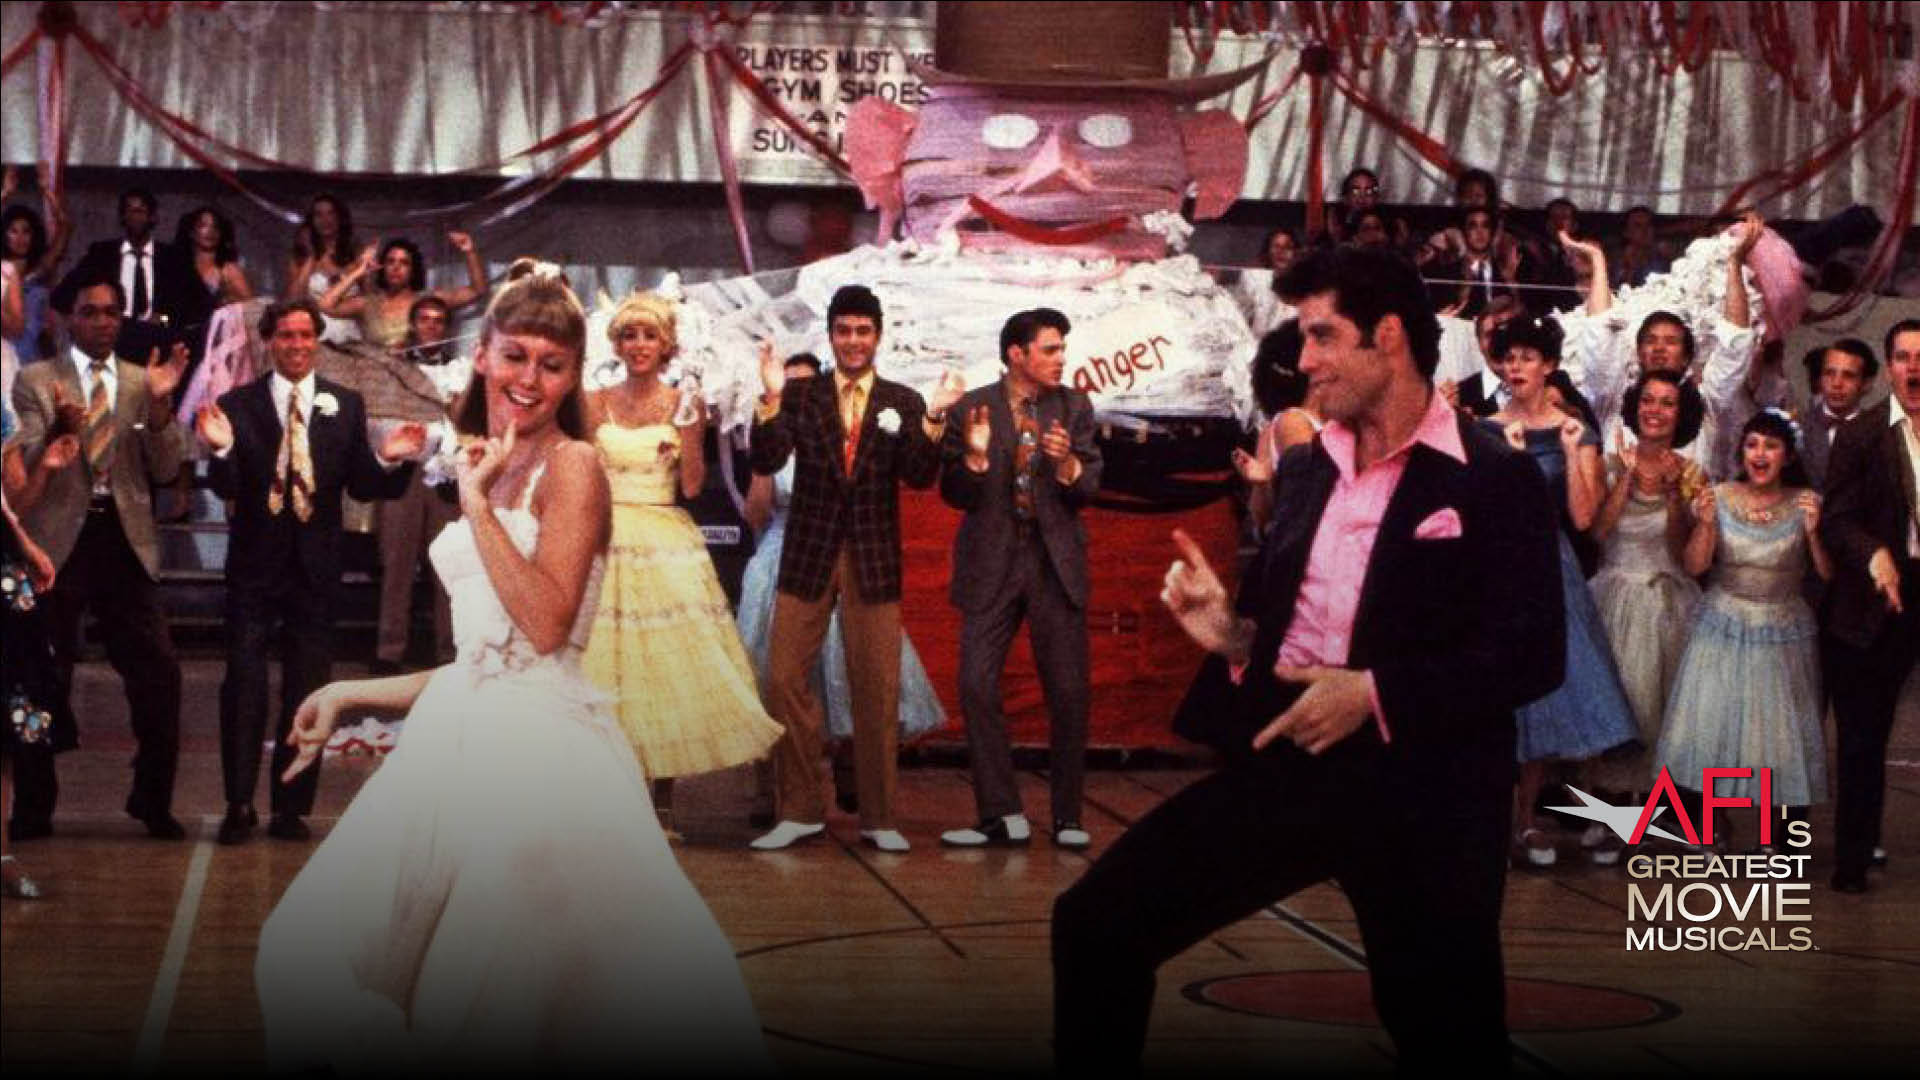 Image from the film GREASE